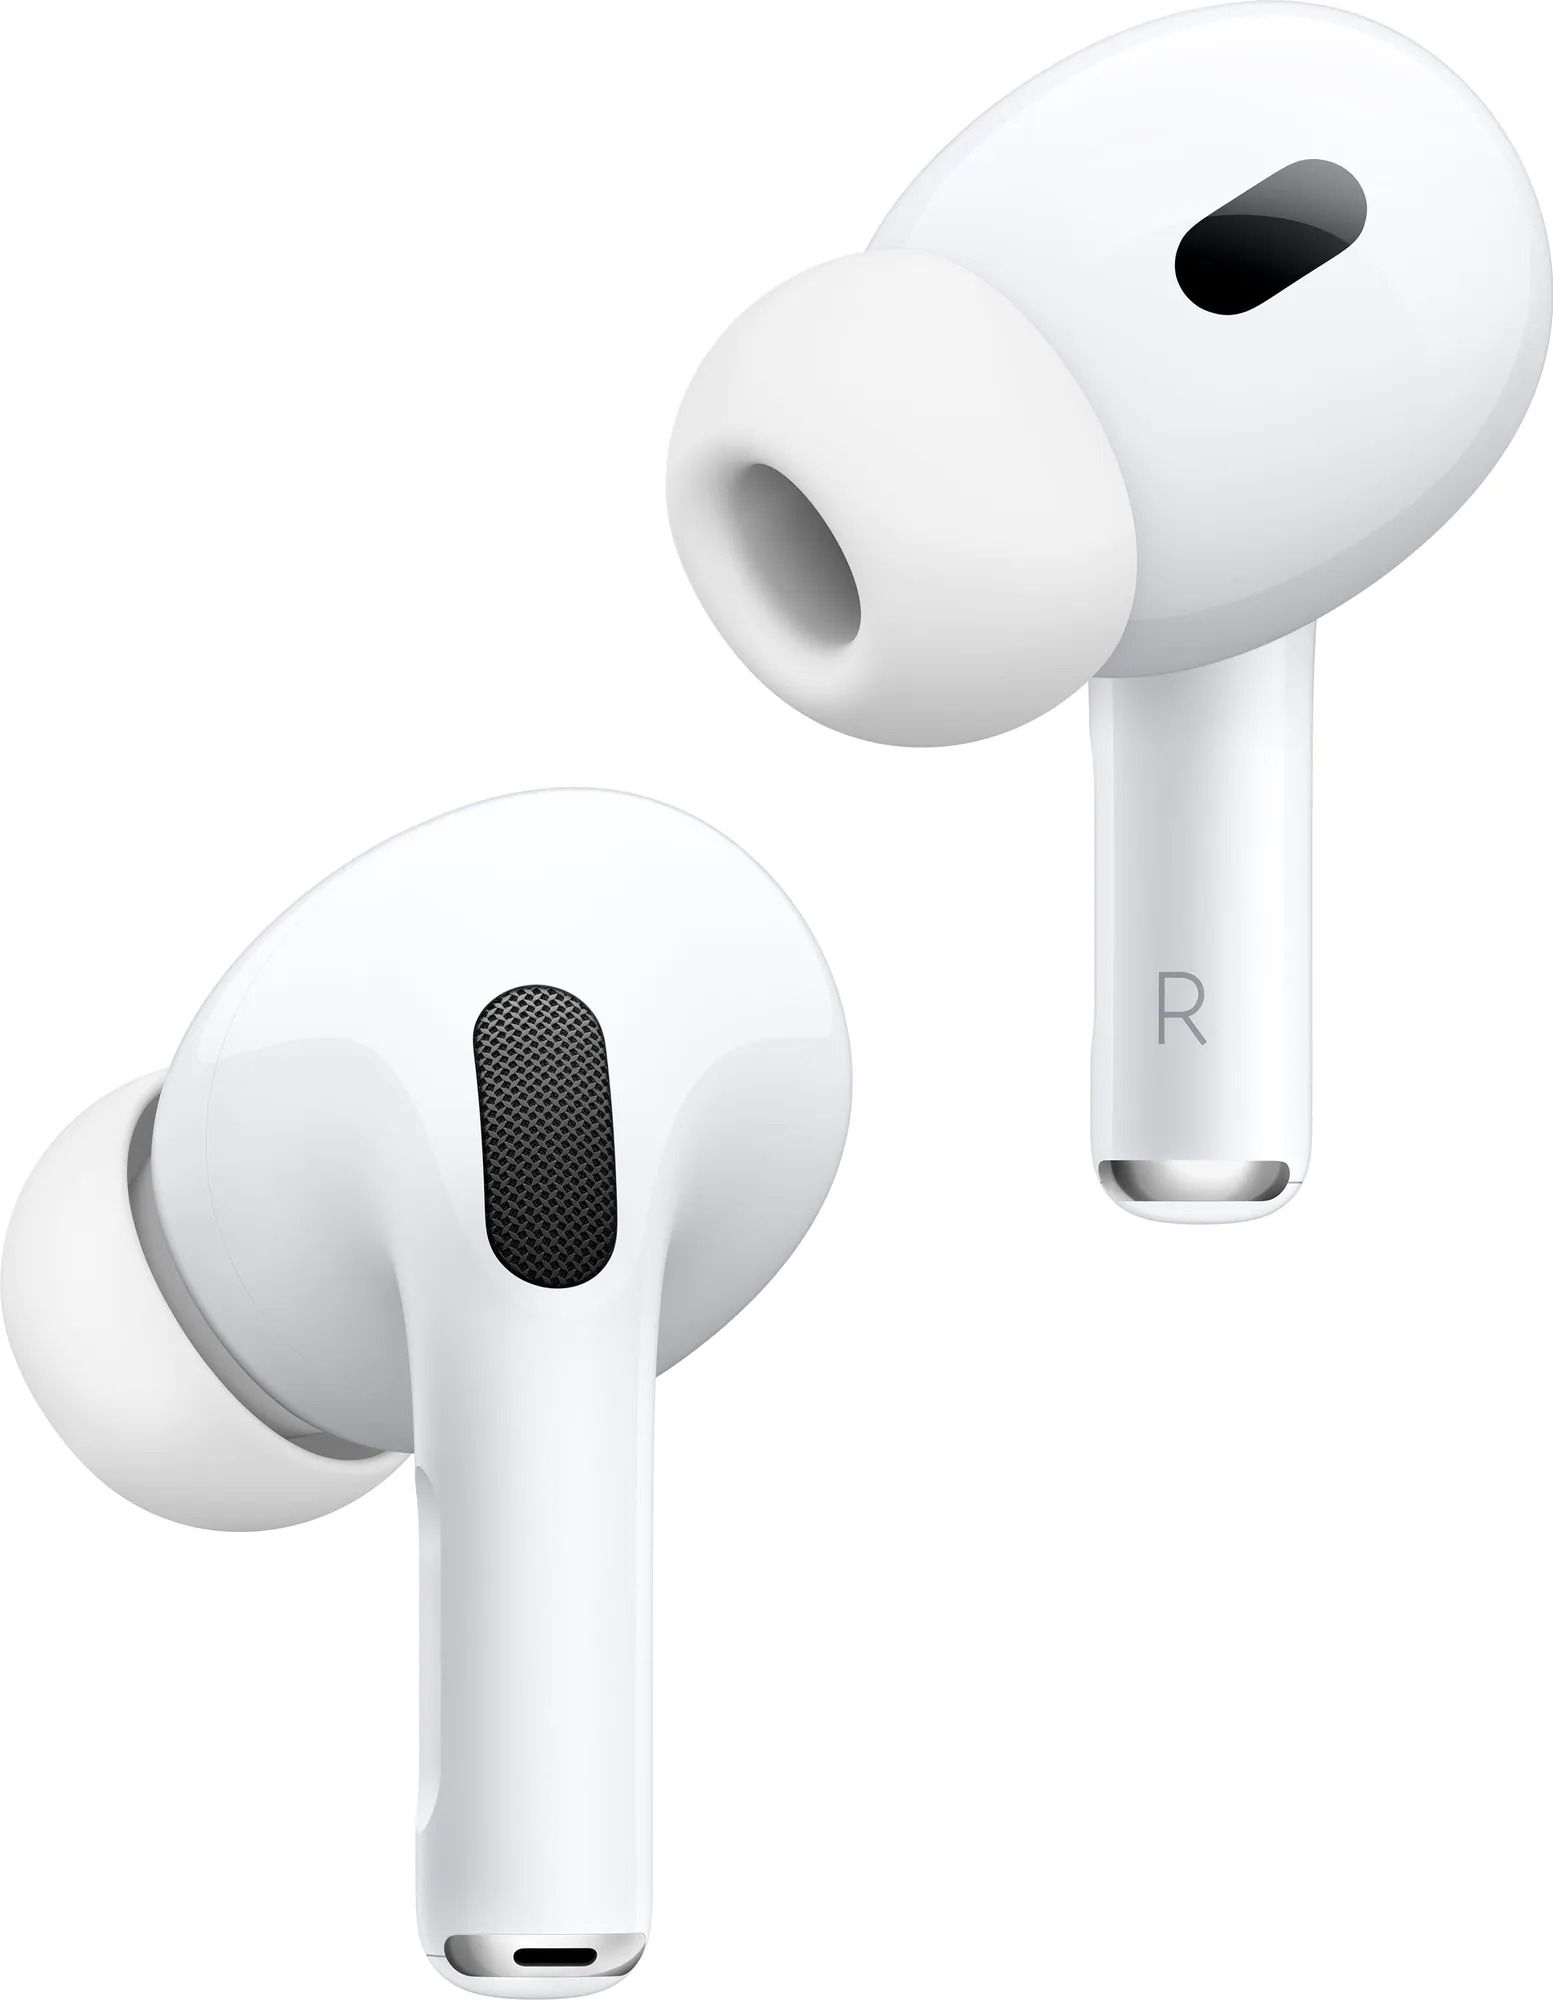 APPLE AIRPODS 2 582849